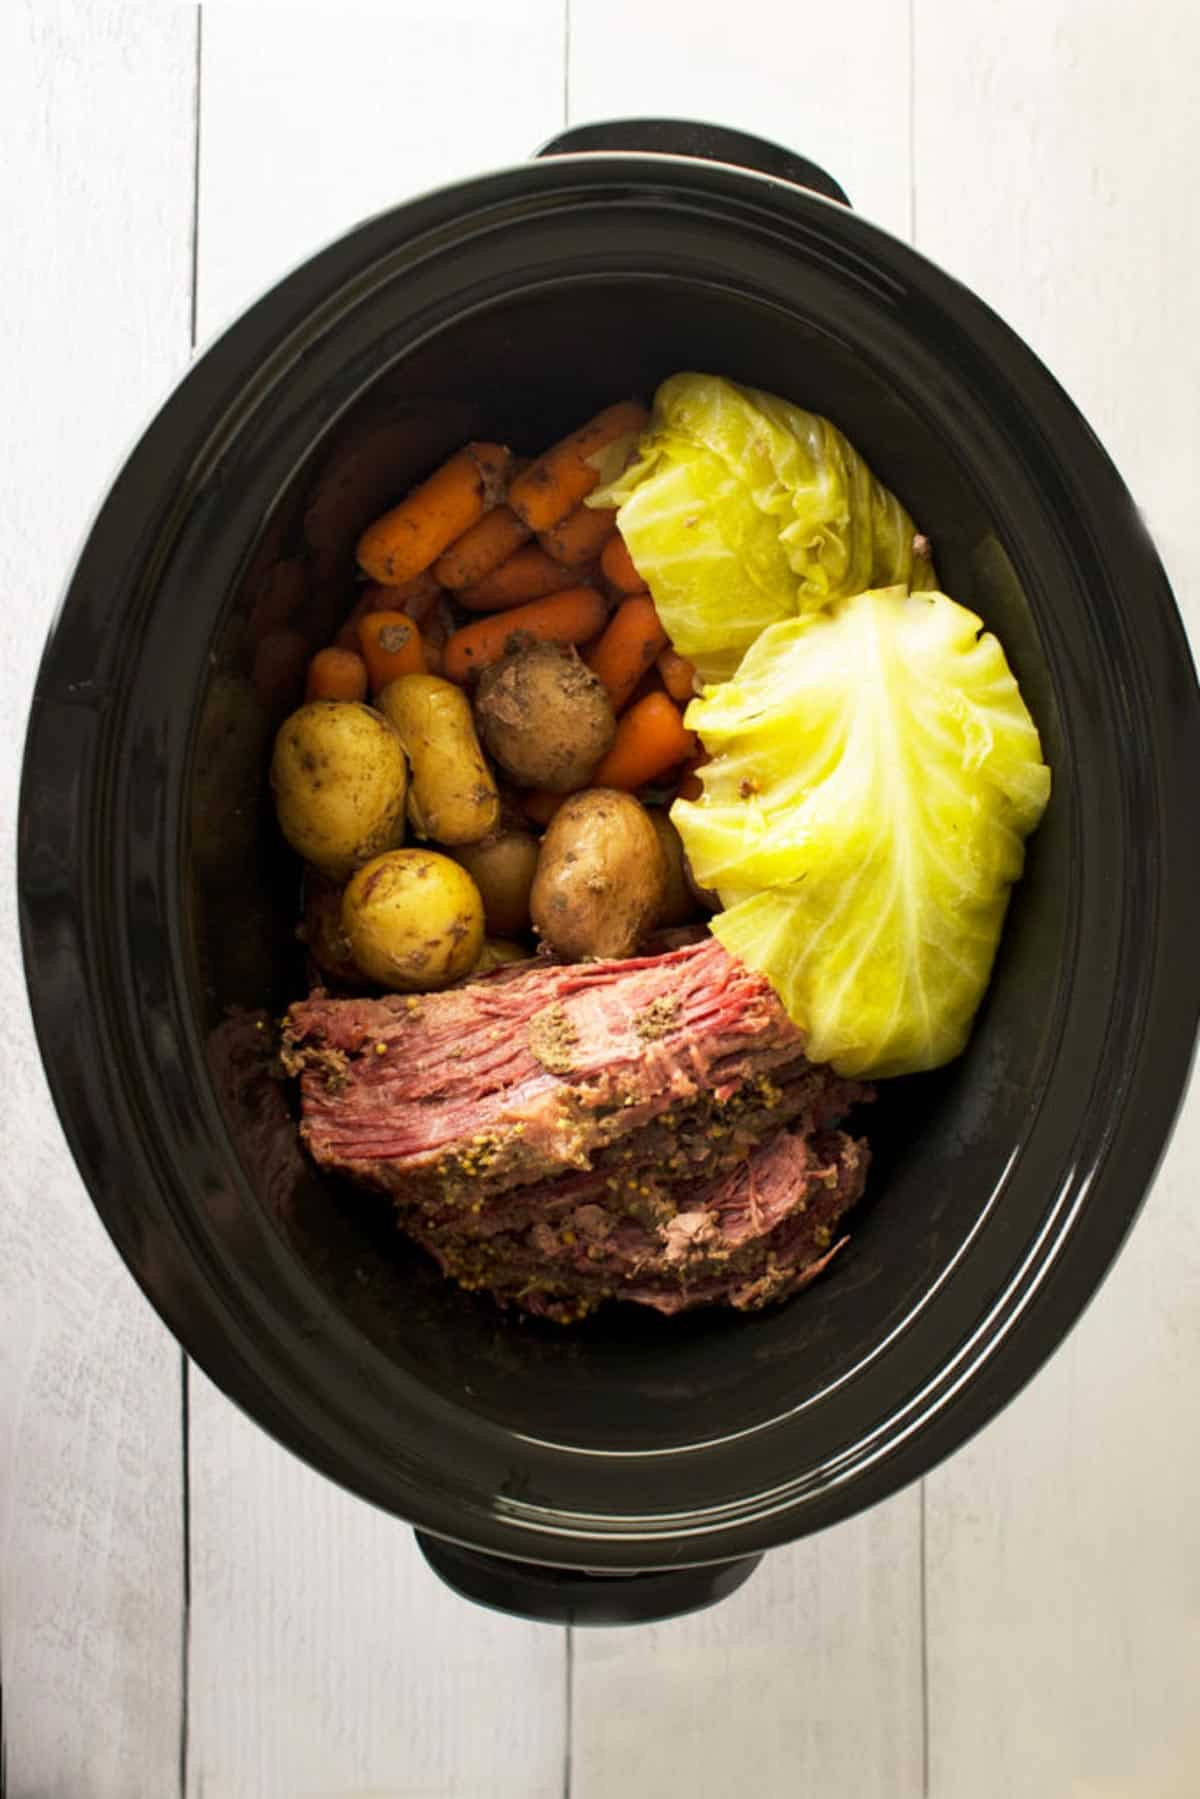 Corned Beef And Cabbage In Crock Pot
 Homemade Corned Beef and Cabbage Crock Pot Recipe